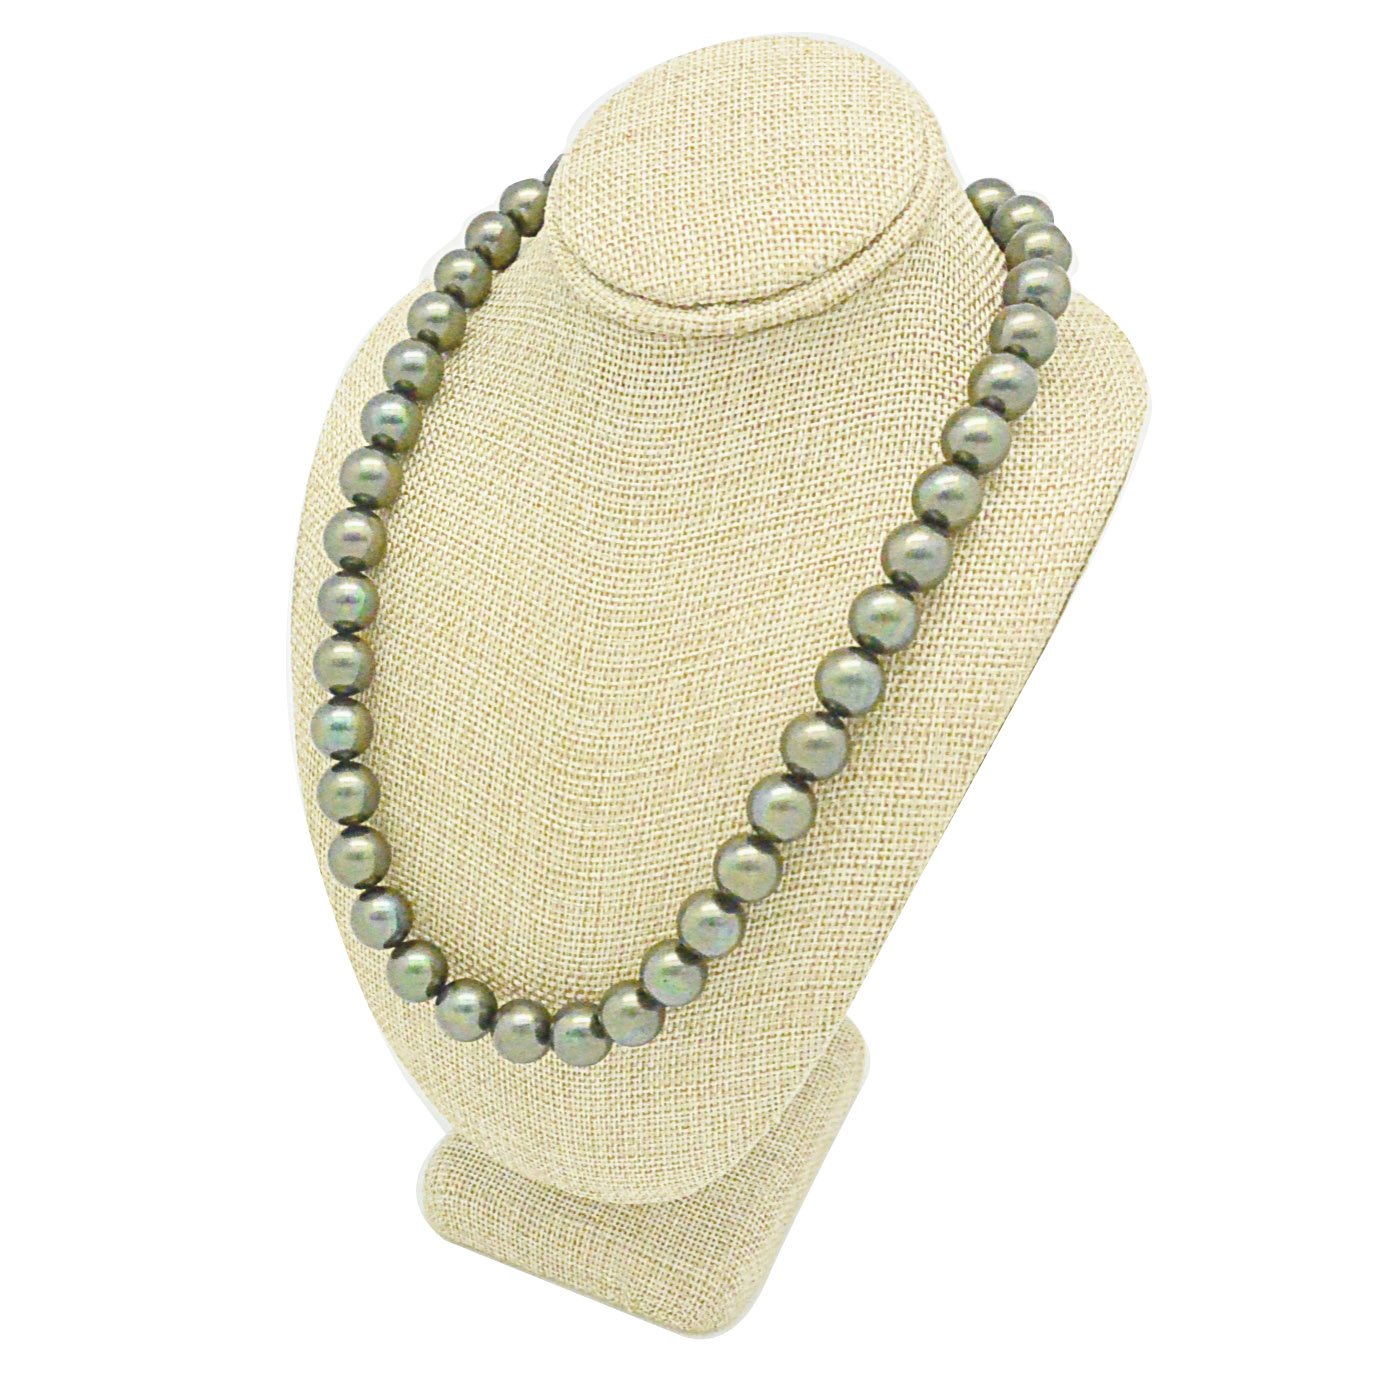 6 3/4" Small Deluxe Beige Burlap Necklace Bust Neck Form